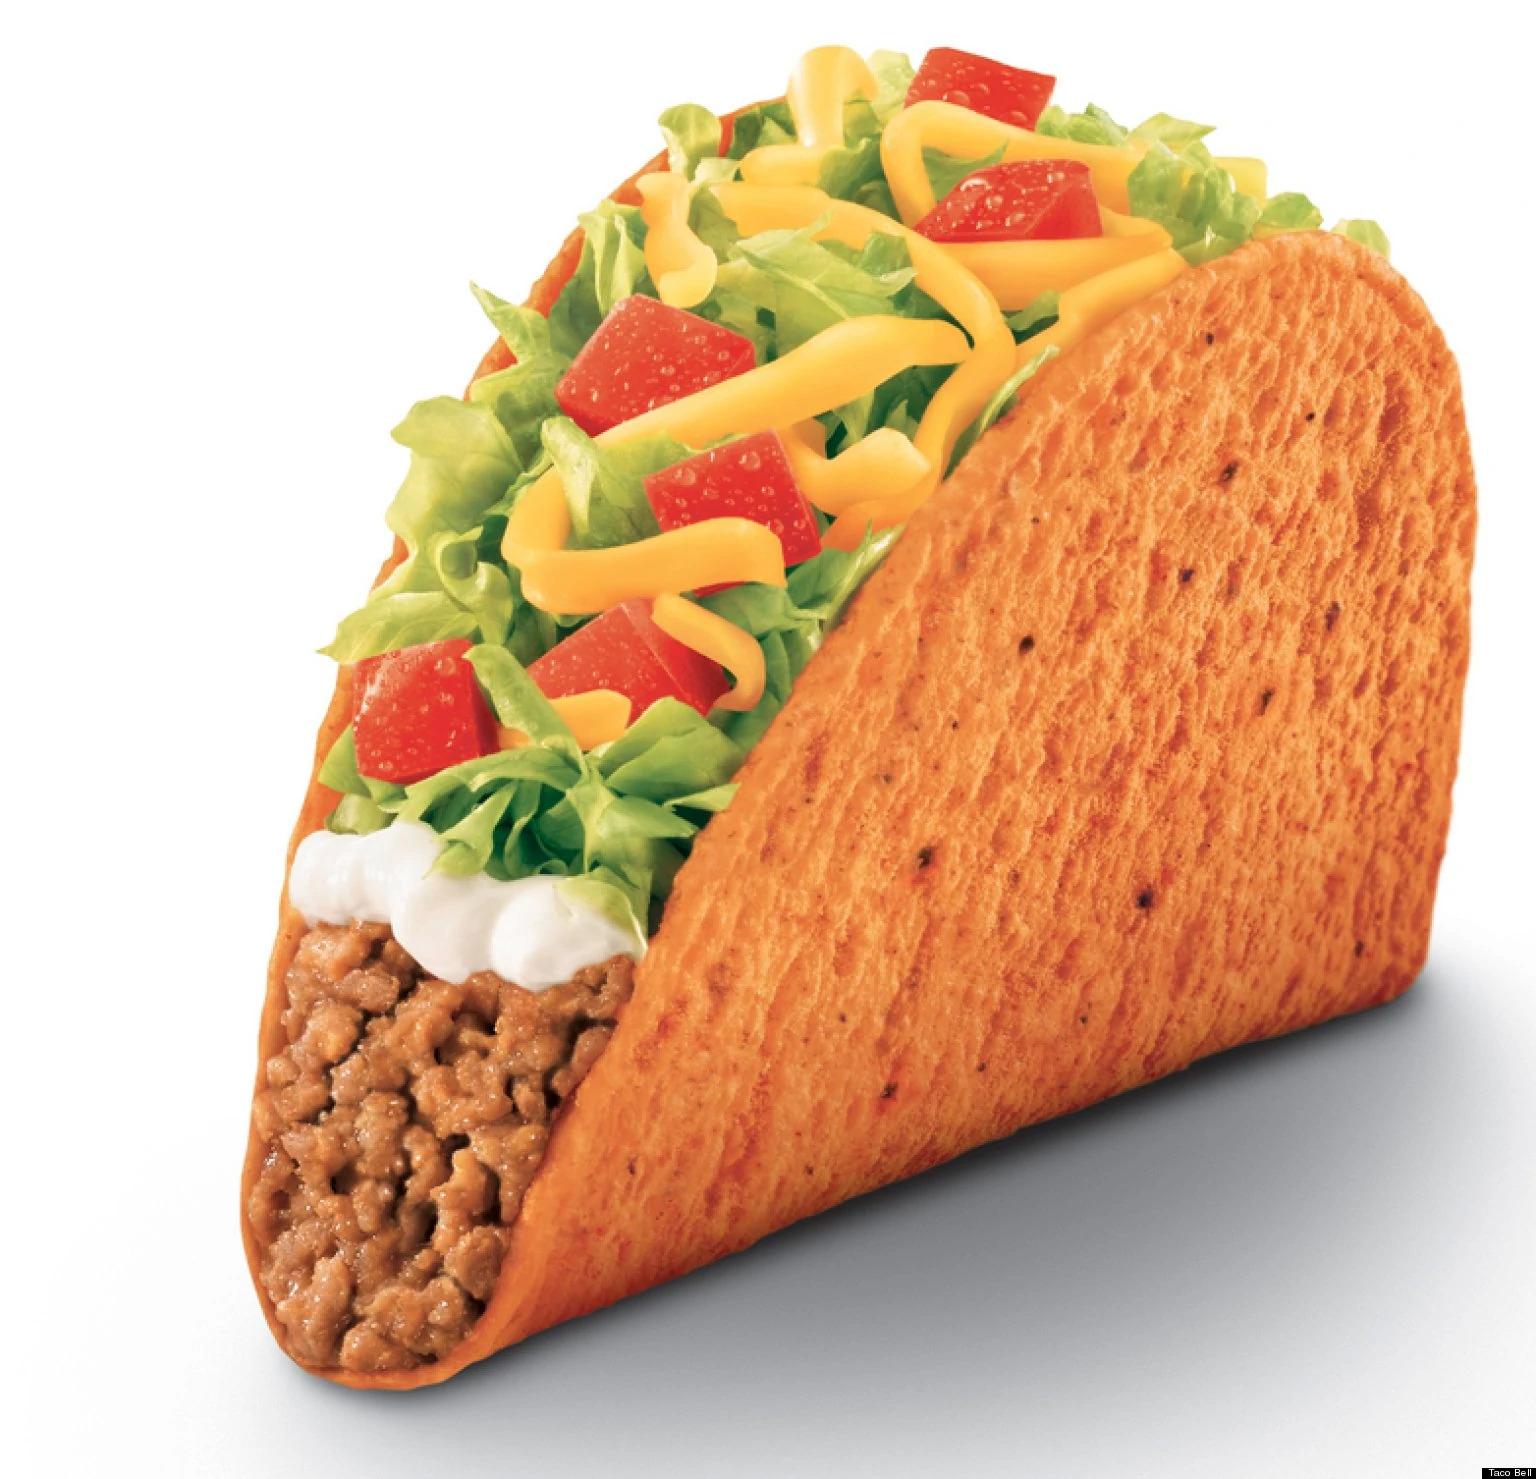 Free Doritos Locos Tacos If a Player Steals a Base During World Series